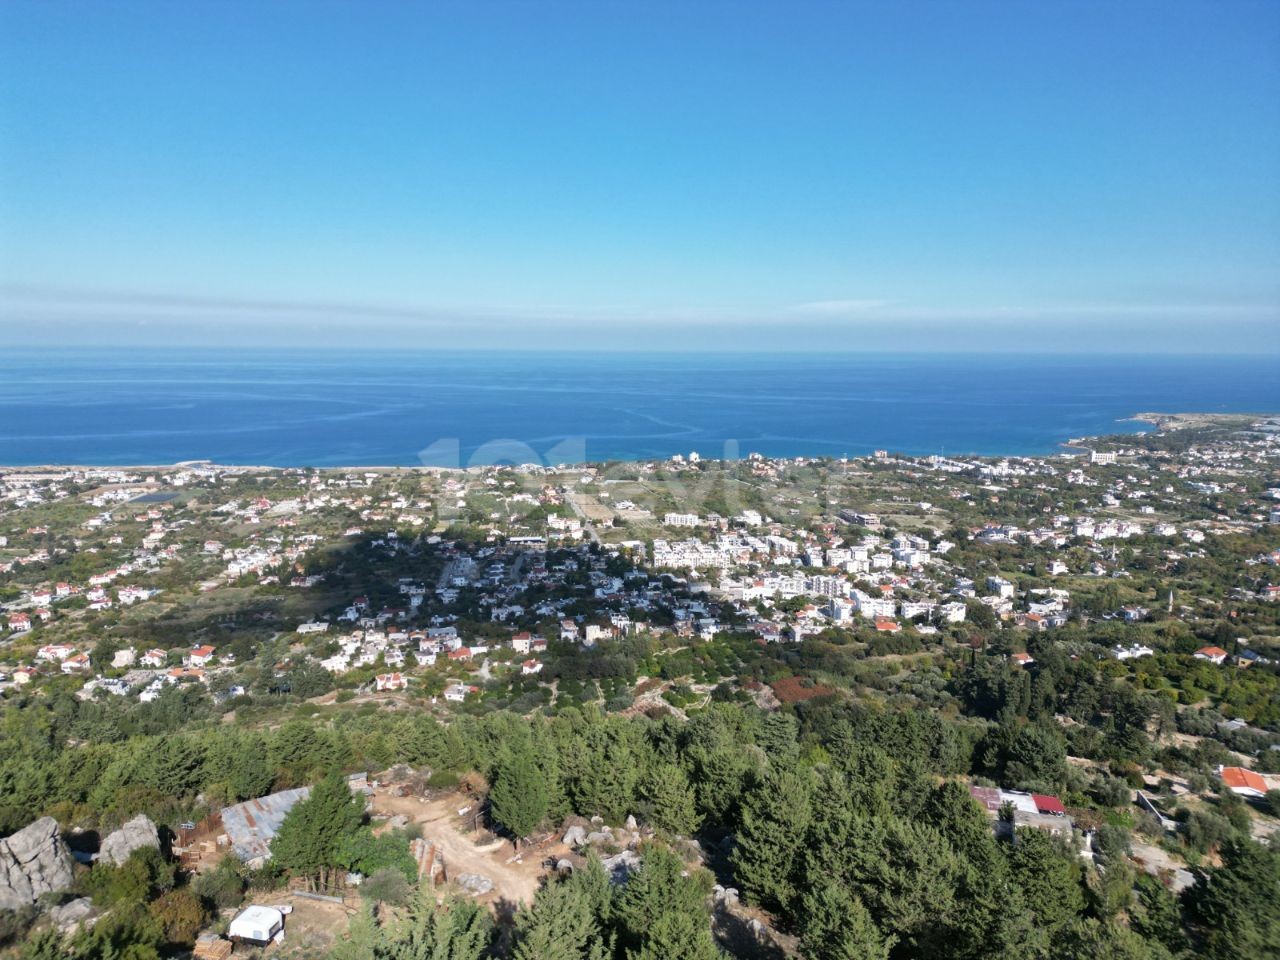 3 acres of land for sale in Başpınar/ Lapta, with Magnificent Sea and Mountain Views